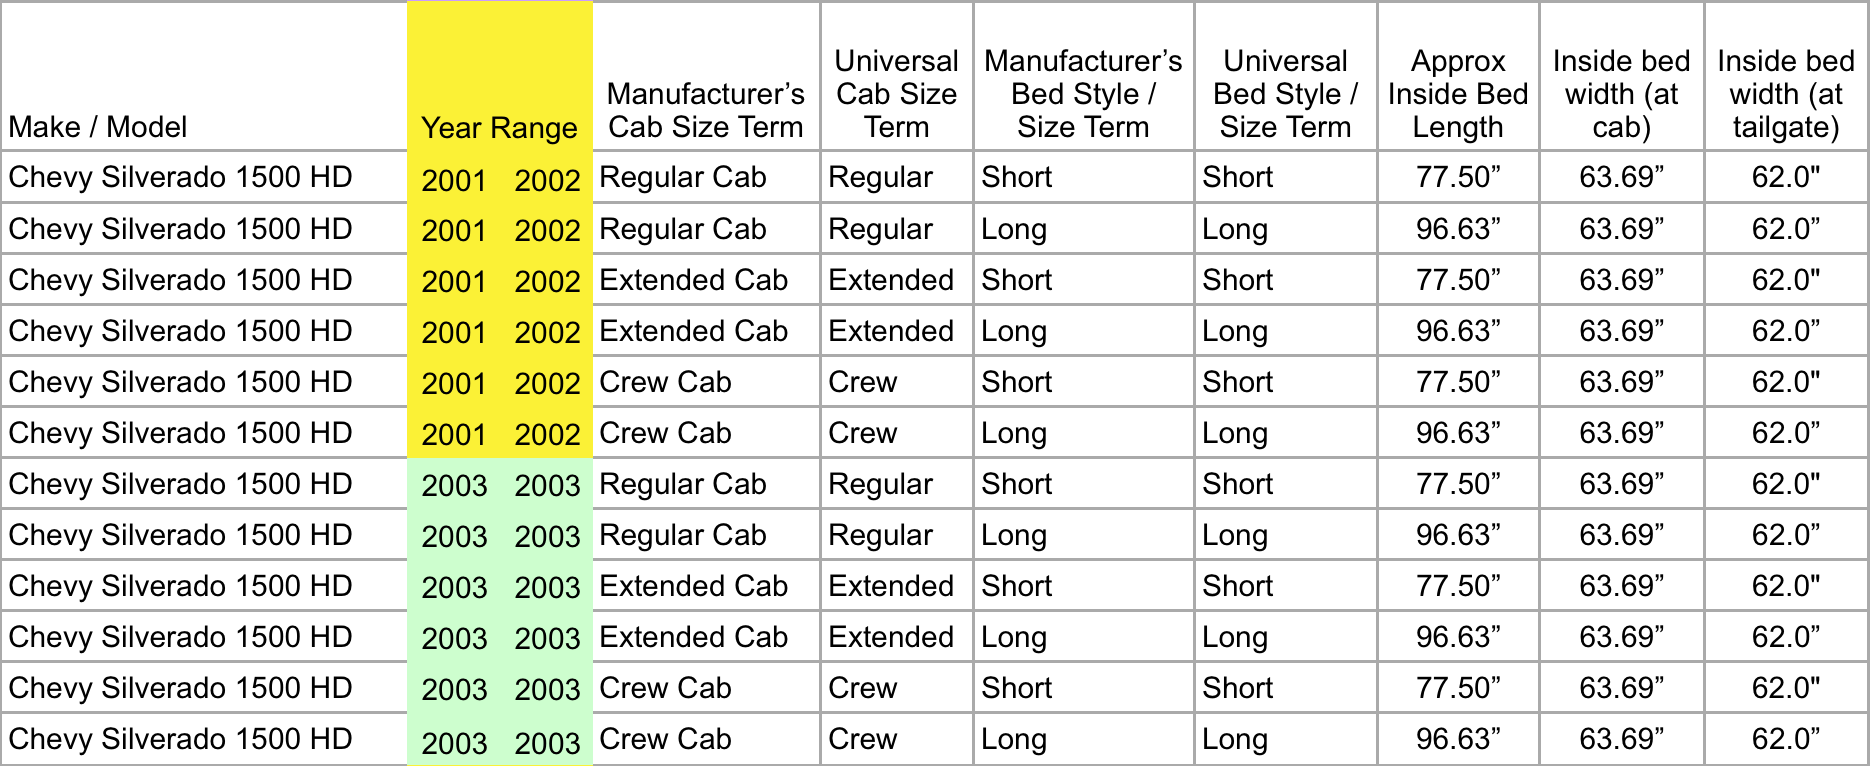 Ford Truck Bed Size Comparison Chart